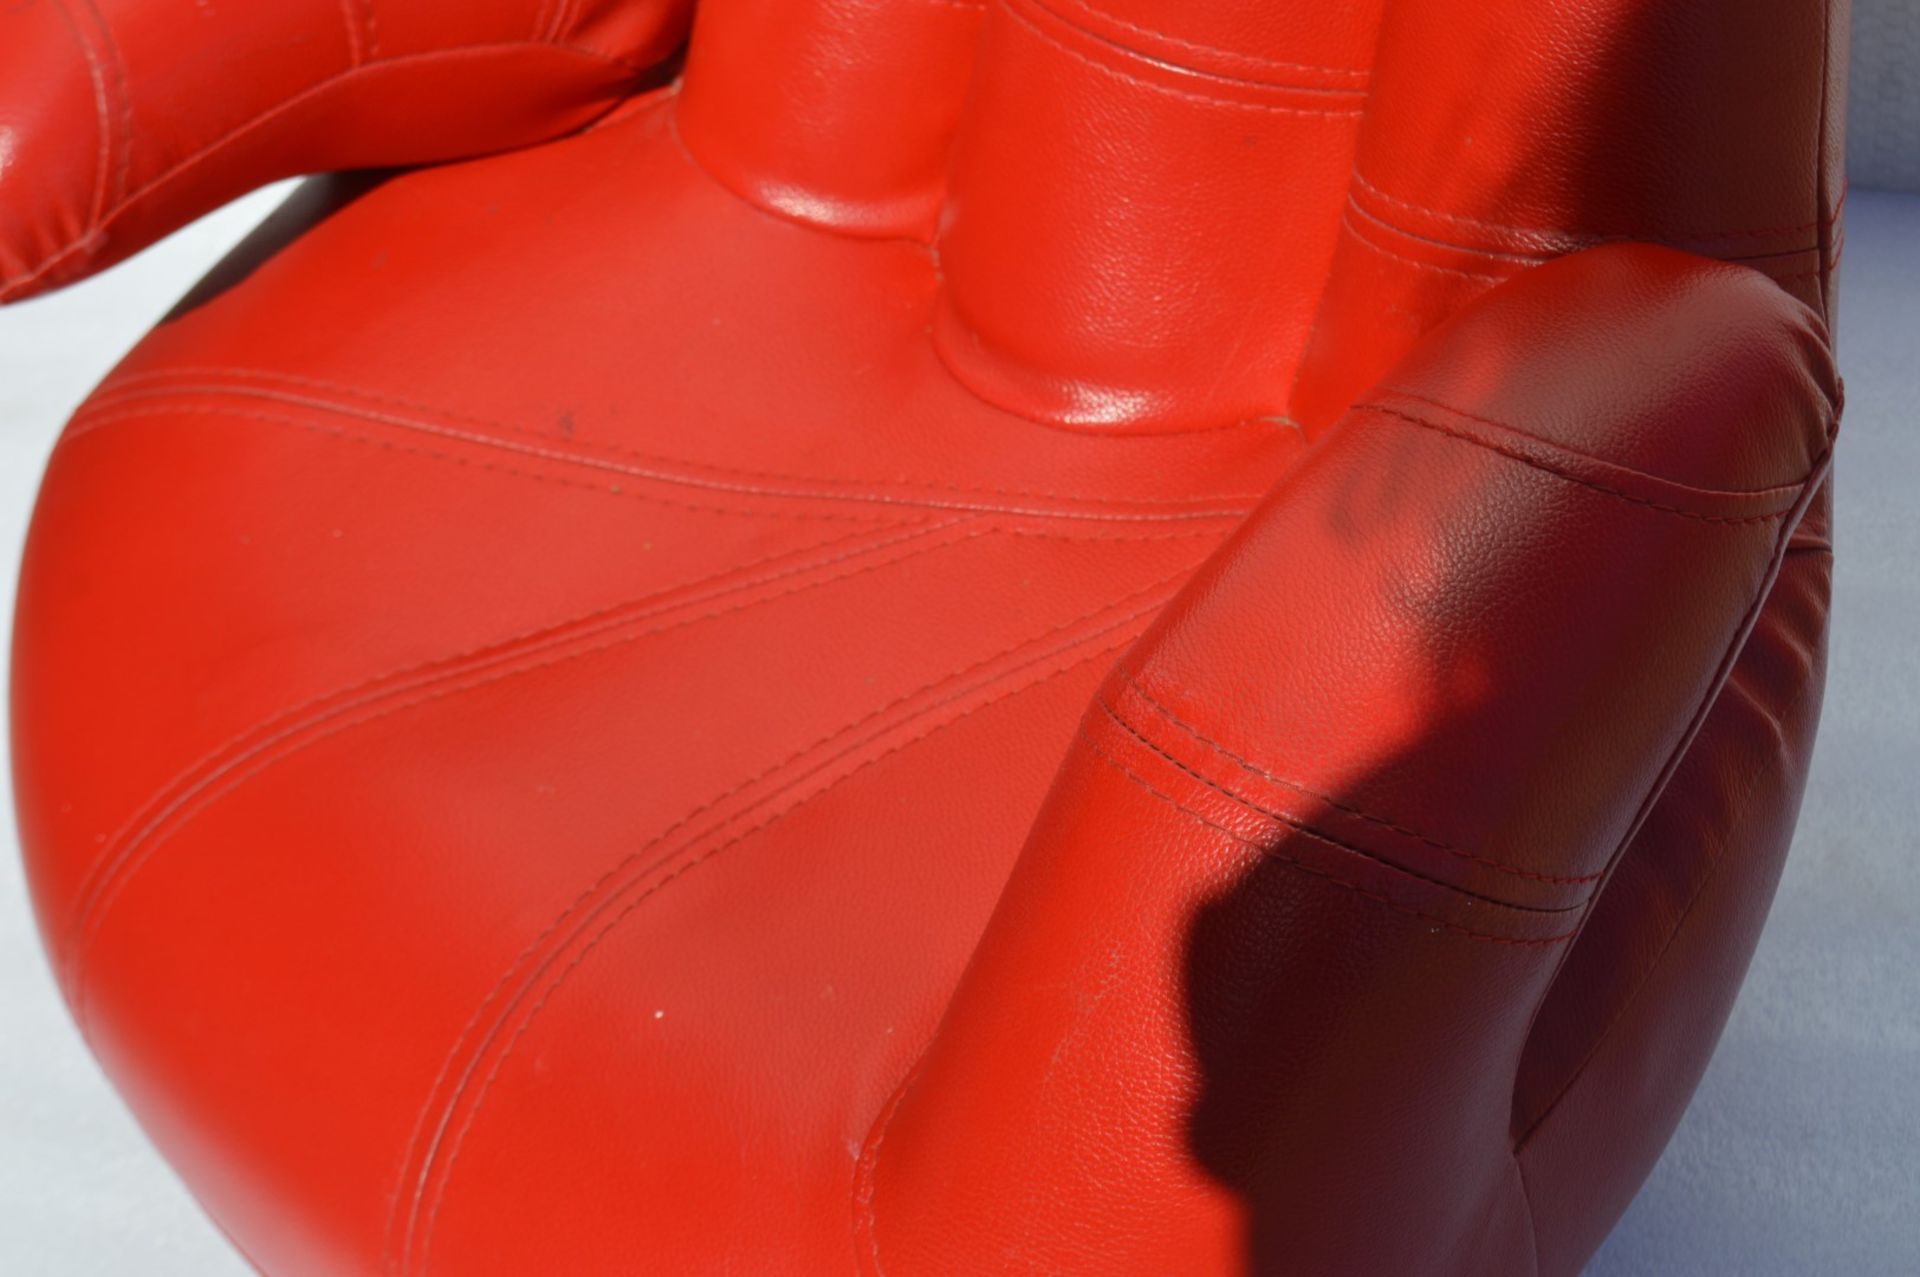 1 x Red Leather Small “HAND” Seat - From An Exclusive Property In Hale Barns - Dimensions: H55 x W50 - Image 6 of 7